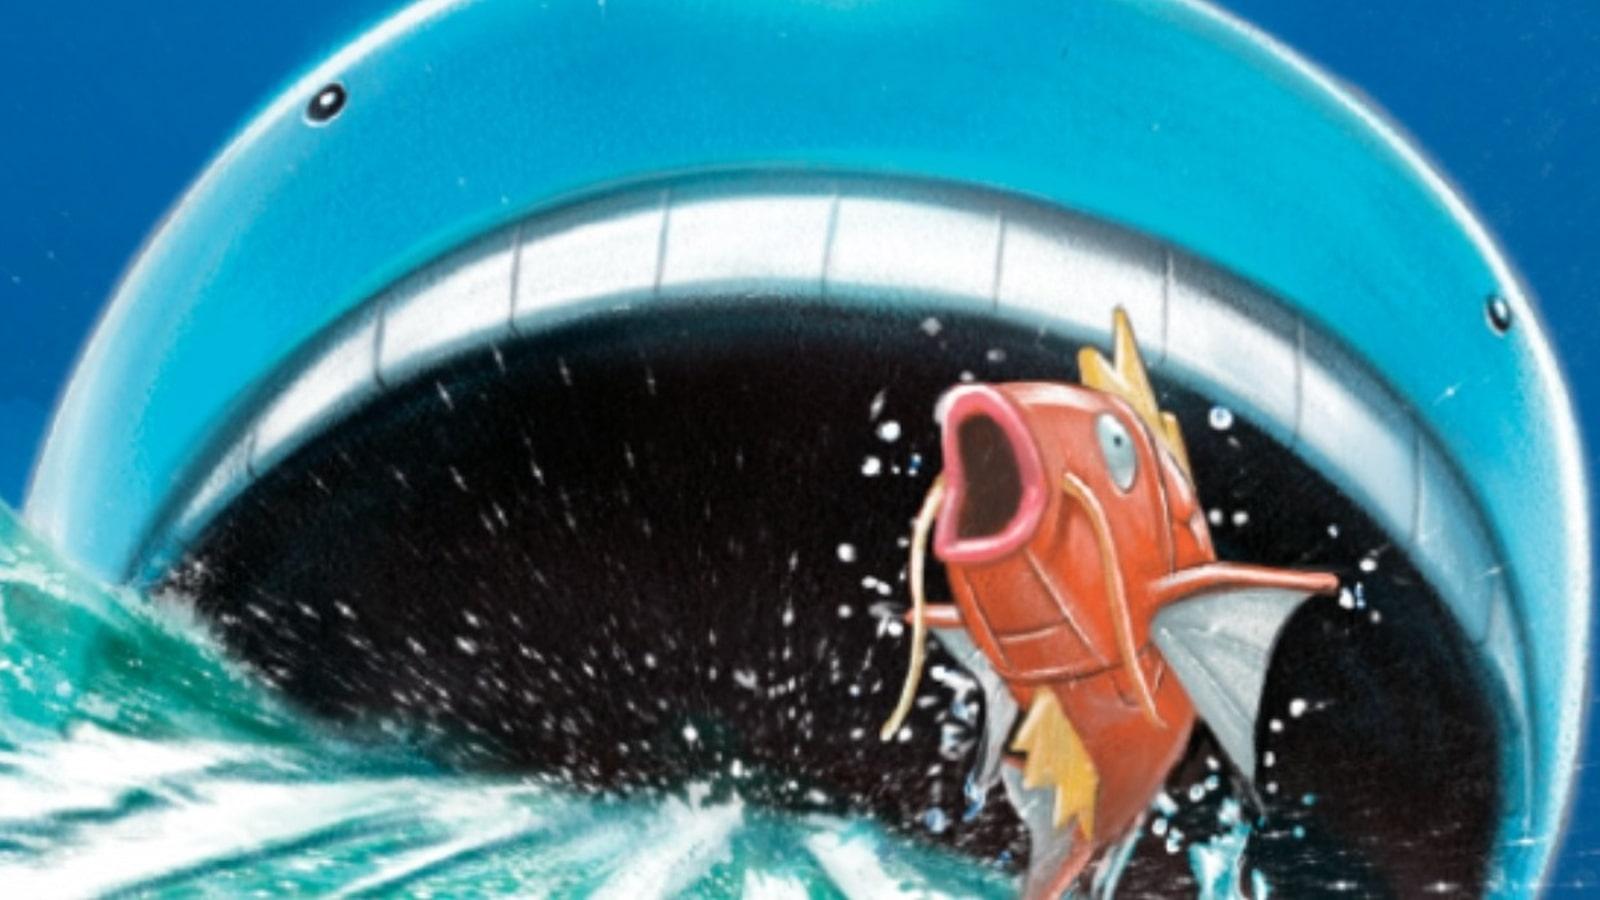 Wailord and Magikarp from the Pokemon Trading Card Game